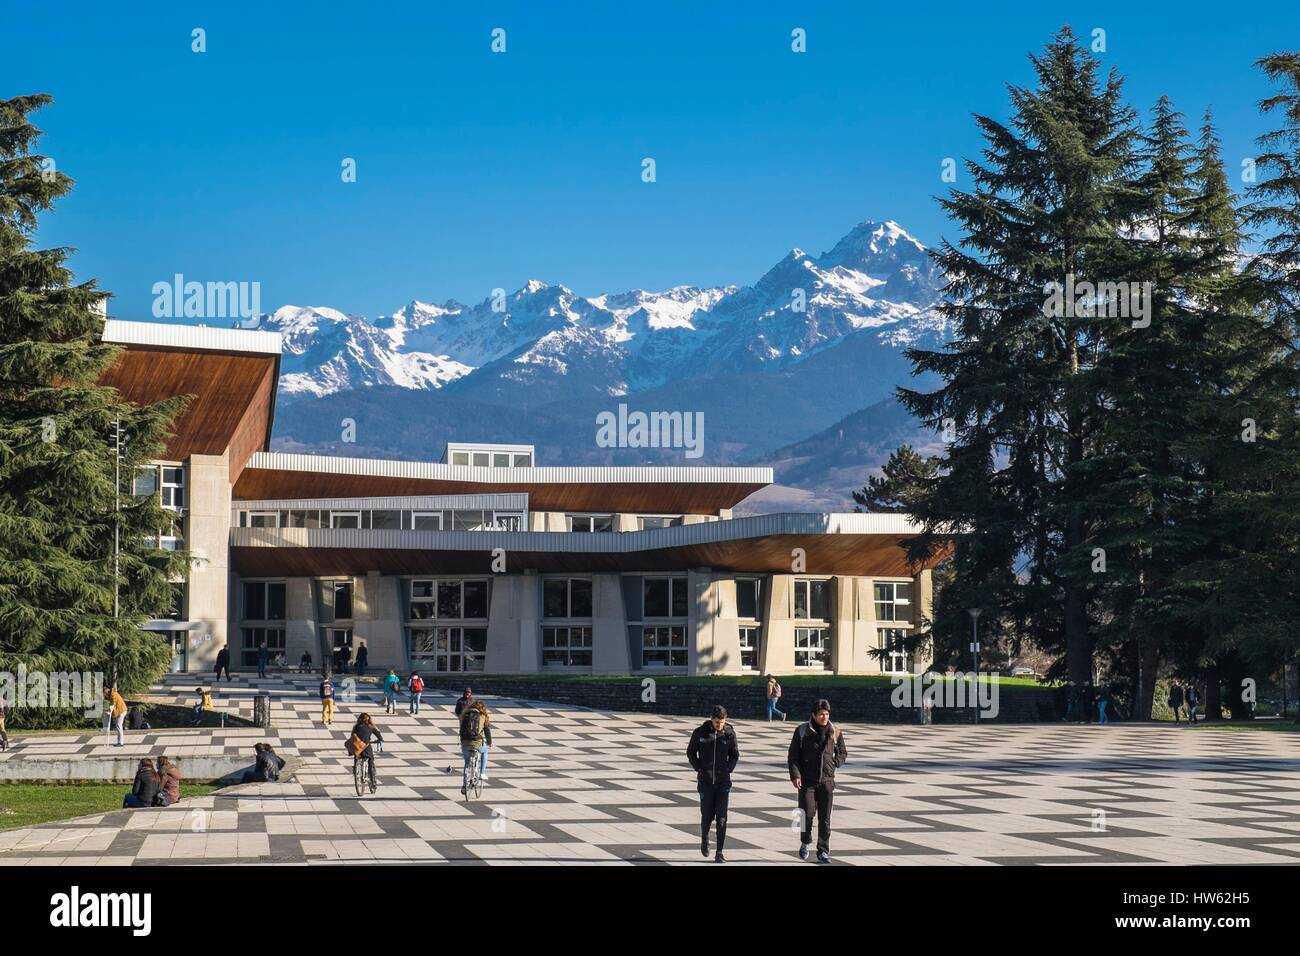 France Isere Saint Martin D Heres The Campus Of Grenoble Alpes University The Library Of Science And Belledonne Range In The Stock Photo Alamy